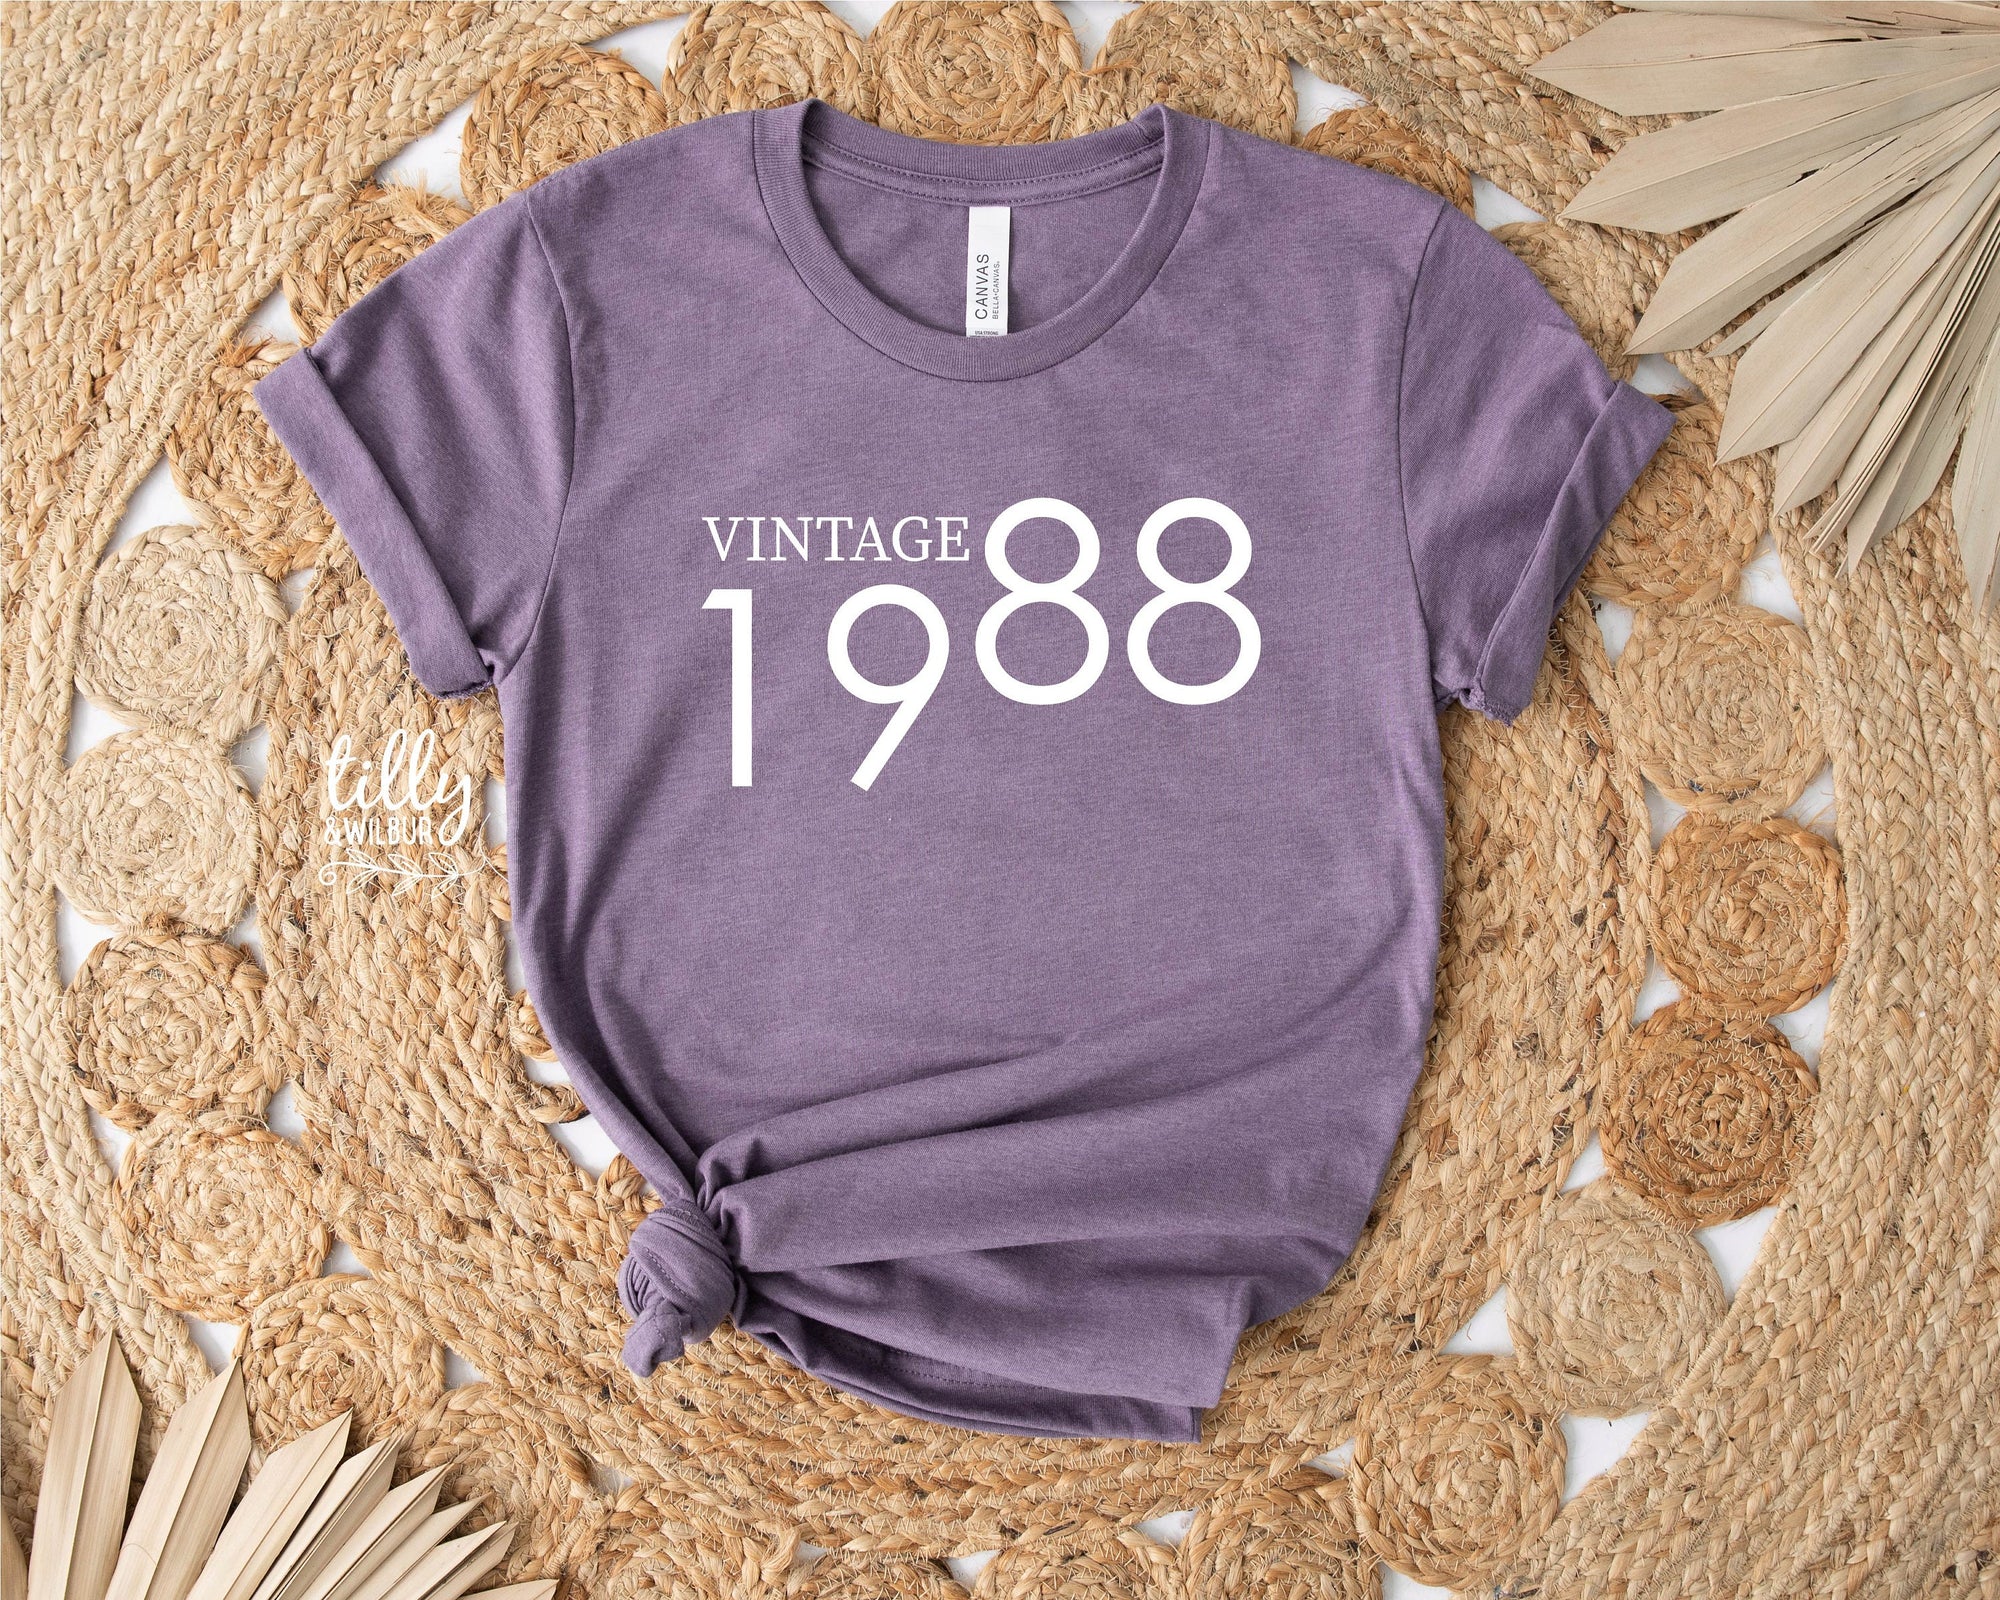 Vintage Birthday T-Shirt With Personalised Year, Limited Edition Birthday T-Shirt, Limited Edition T-Shirt, Personalised Birthday T-Shirt